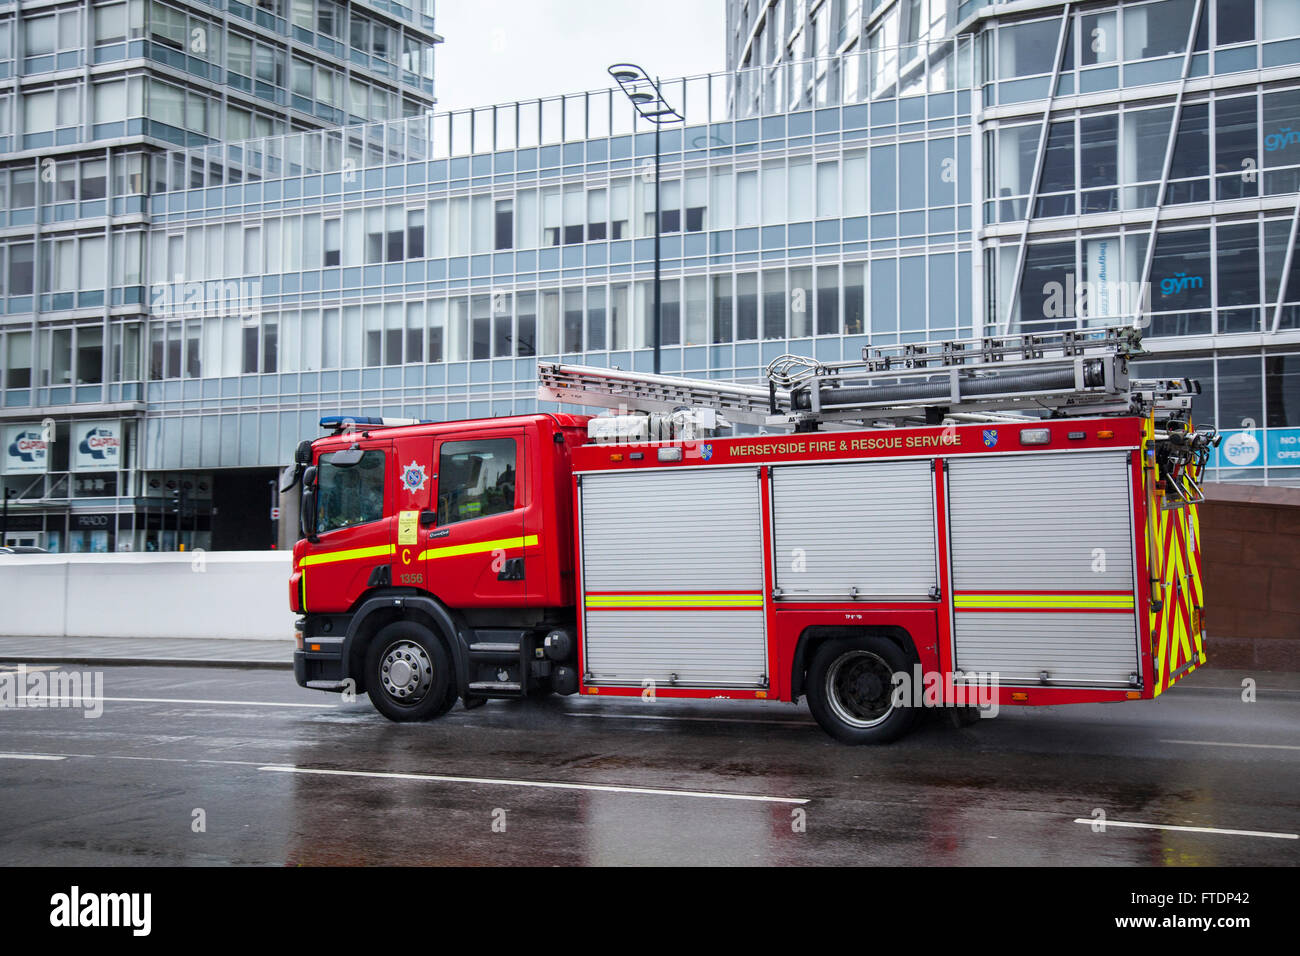 Merseyside Fire & Rescue appliance, fire truck, emergency  vehicle, rescue, firefighter, safety, engine, red, transportation, equipment, transport, fireman, danger, department, service firetruck, responding to an emergency on The Strand, Liverpool, UK Stock Photo